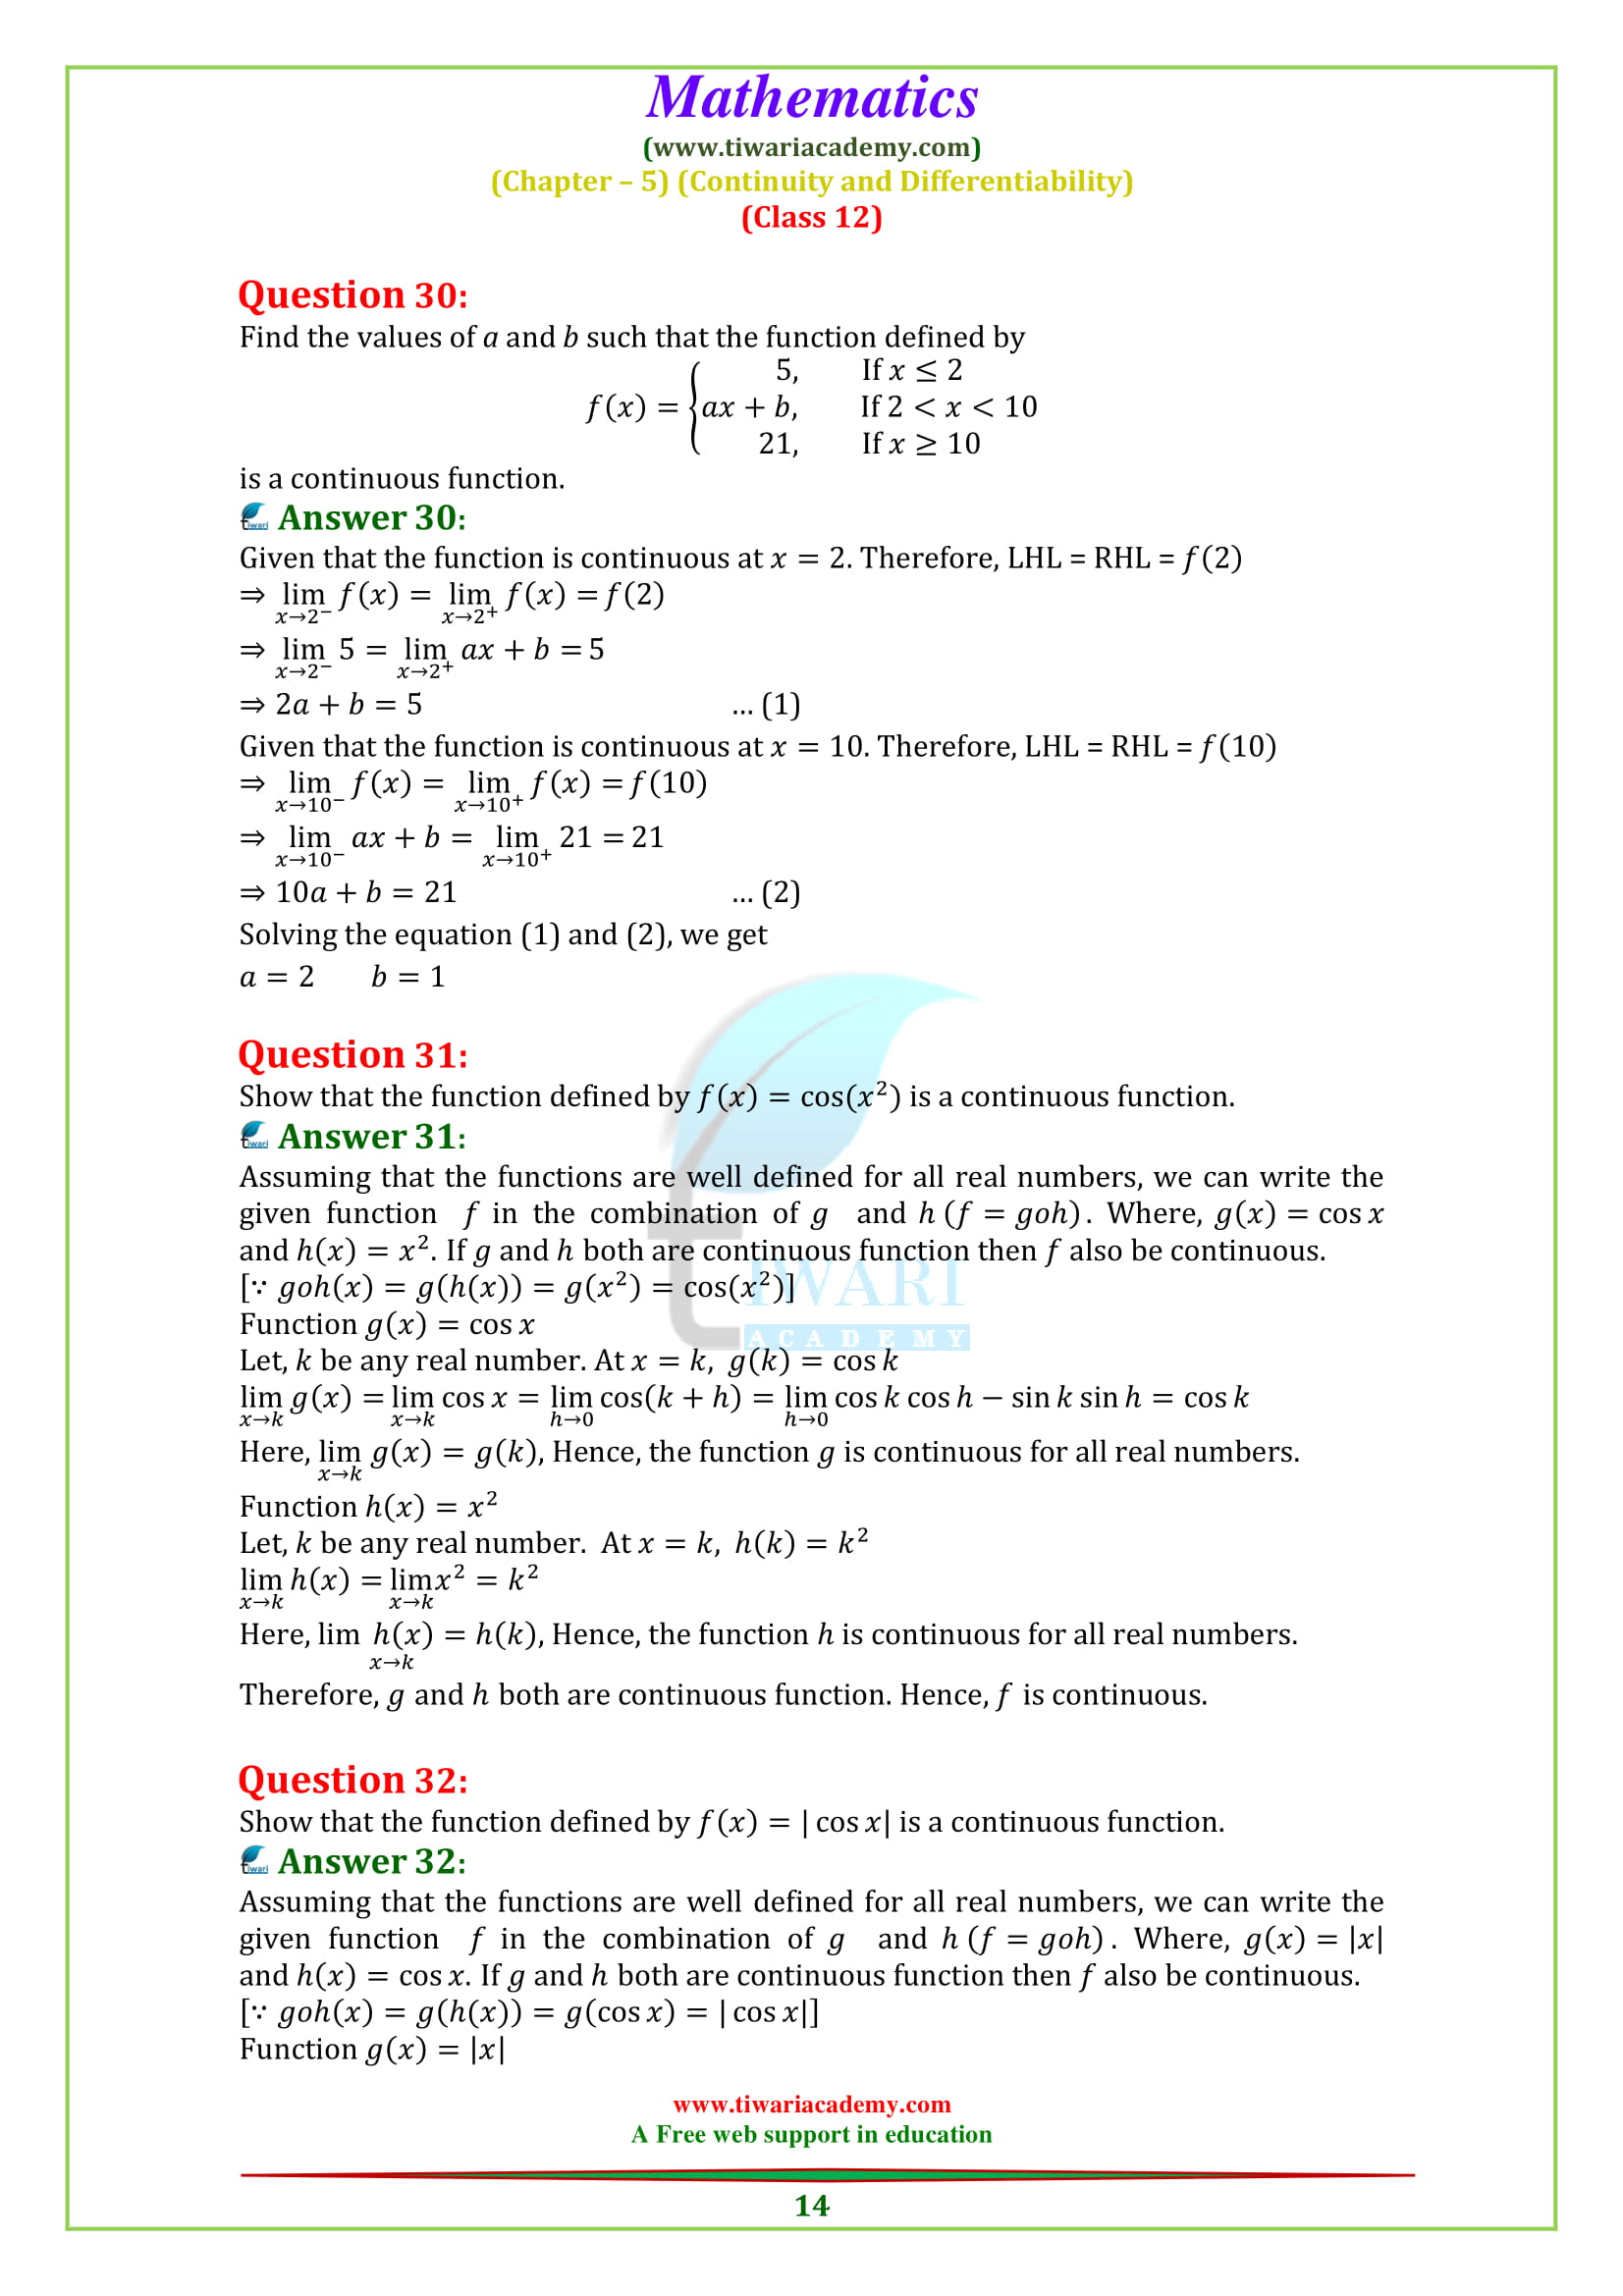 12 Maths Exercise 5.1 solutions question 28, 29